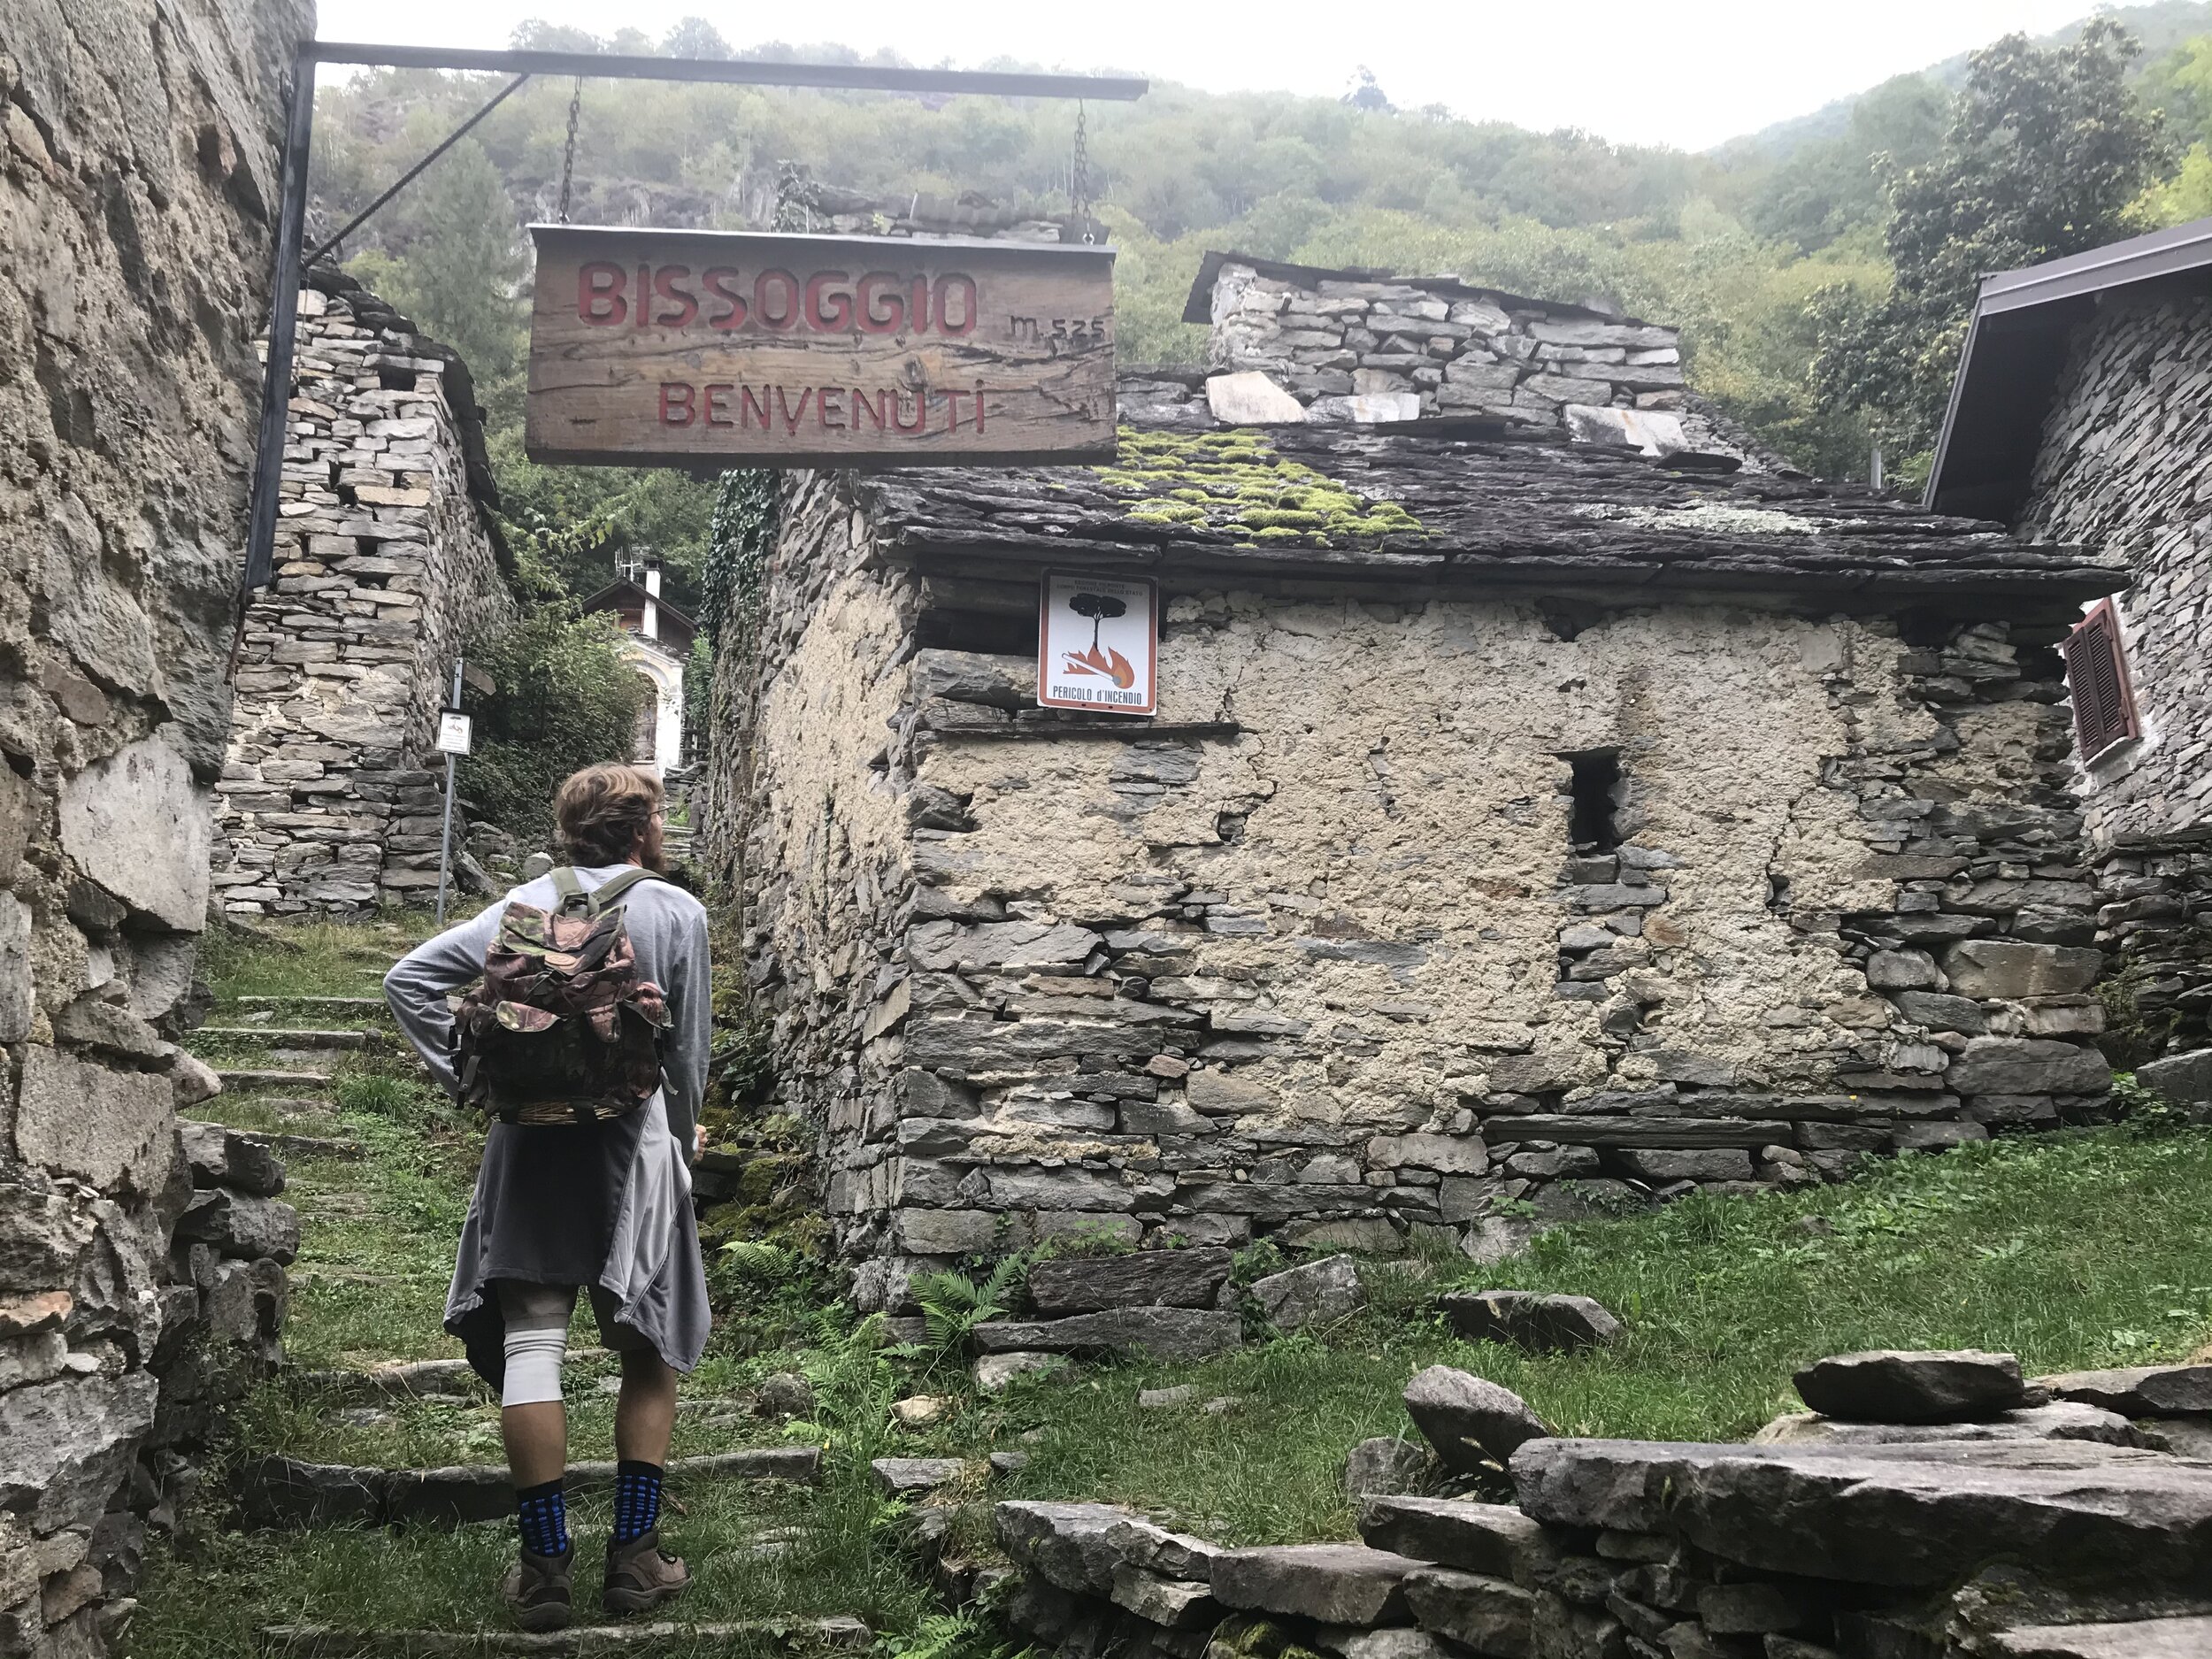   PICTURED:  The shepherd town of Bessoggio, abandoned most of the year, but still maintained by rural Italians.  